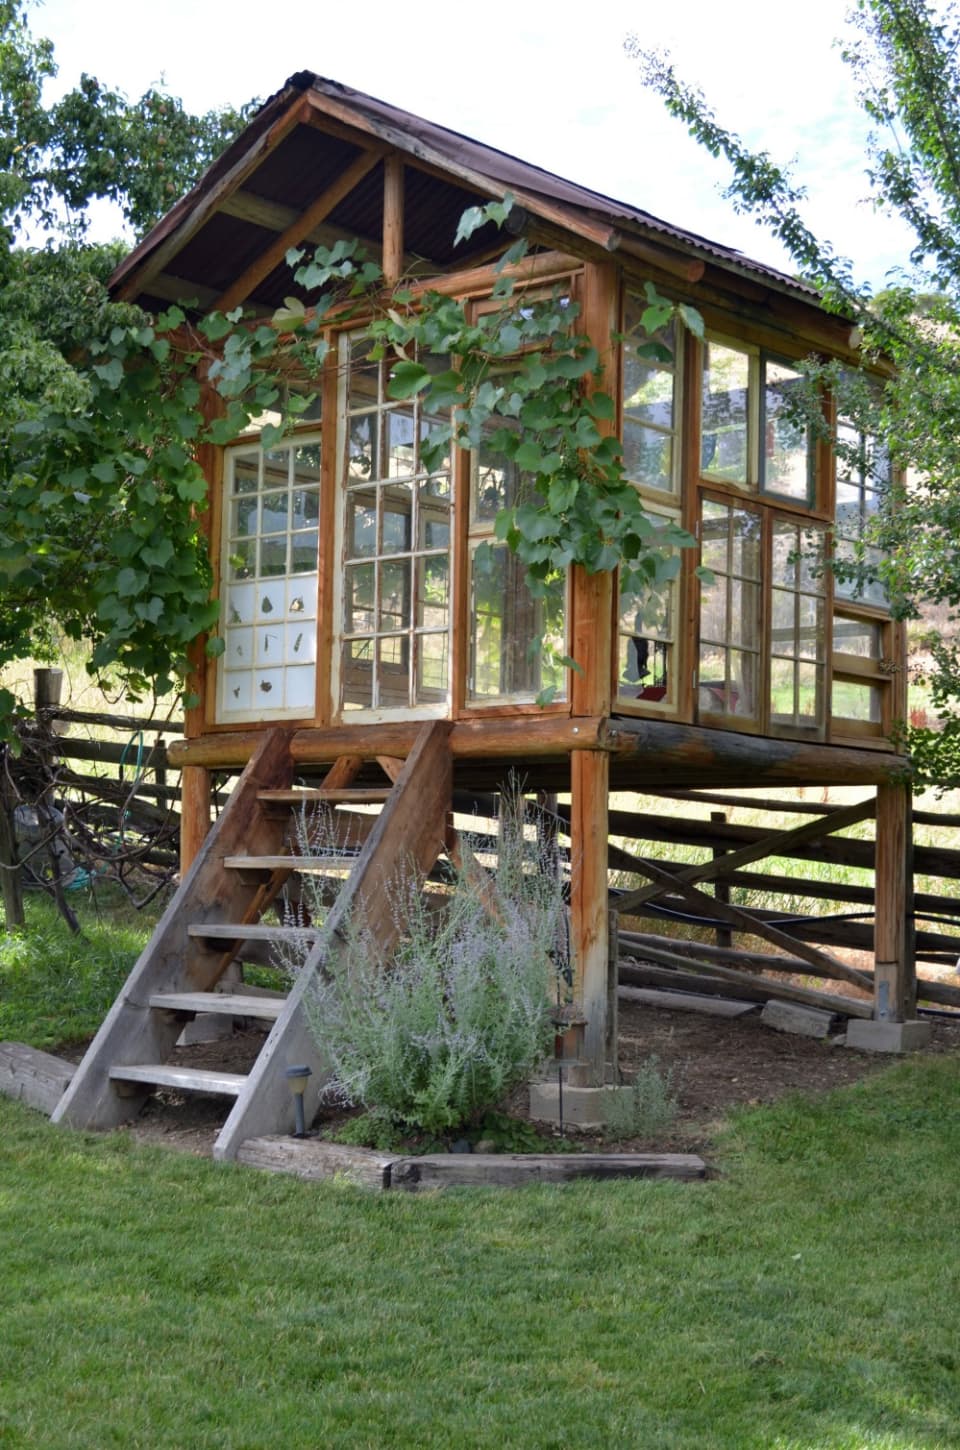 Beautiful elevated she shed in Erika Kottie book. Come explore She Shed Chic, Potting Shed & Backyard Inspiration.